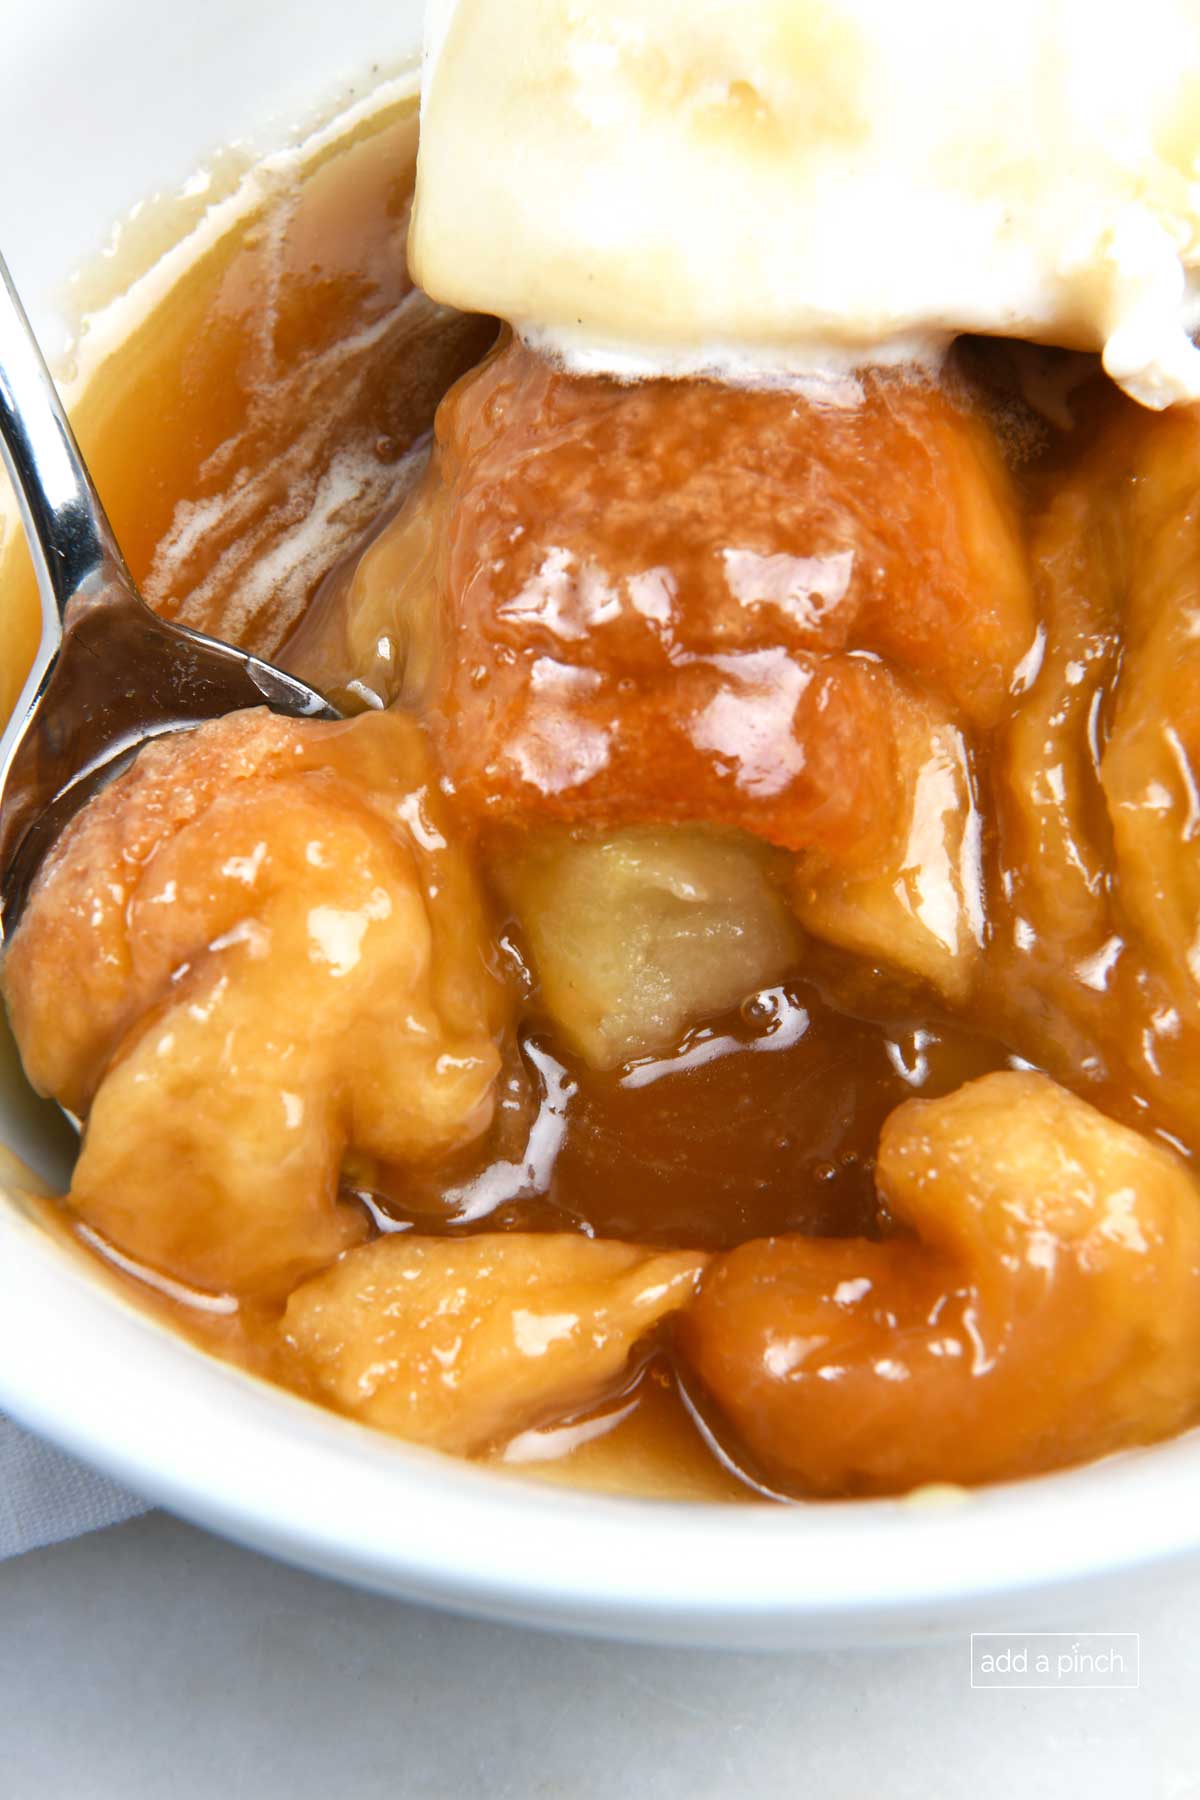 Photo of a spoon filled bite of apple dumpling in a white bowl of dumplings topped with vanilla ice cream and caramel sauce.